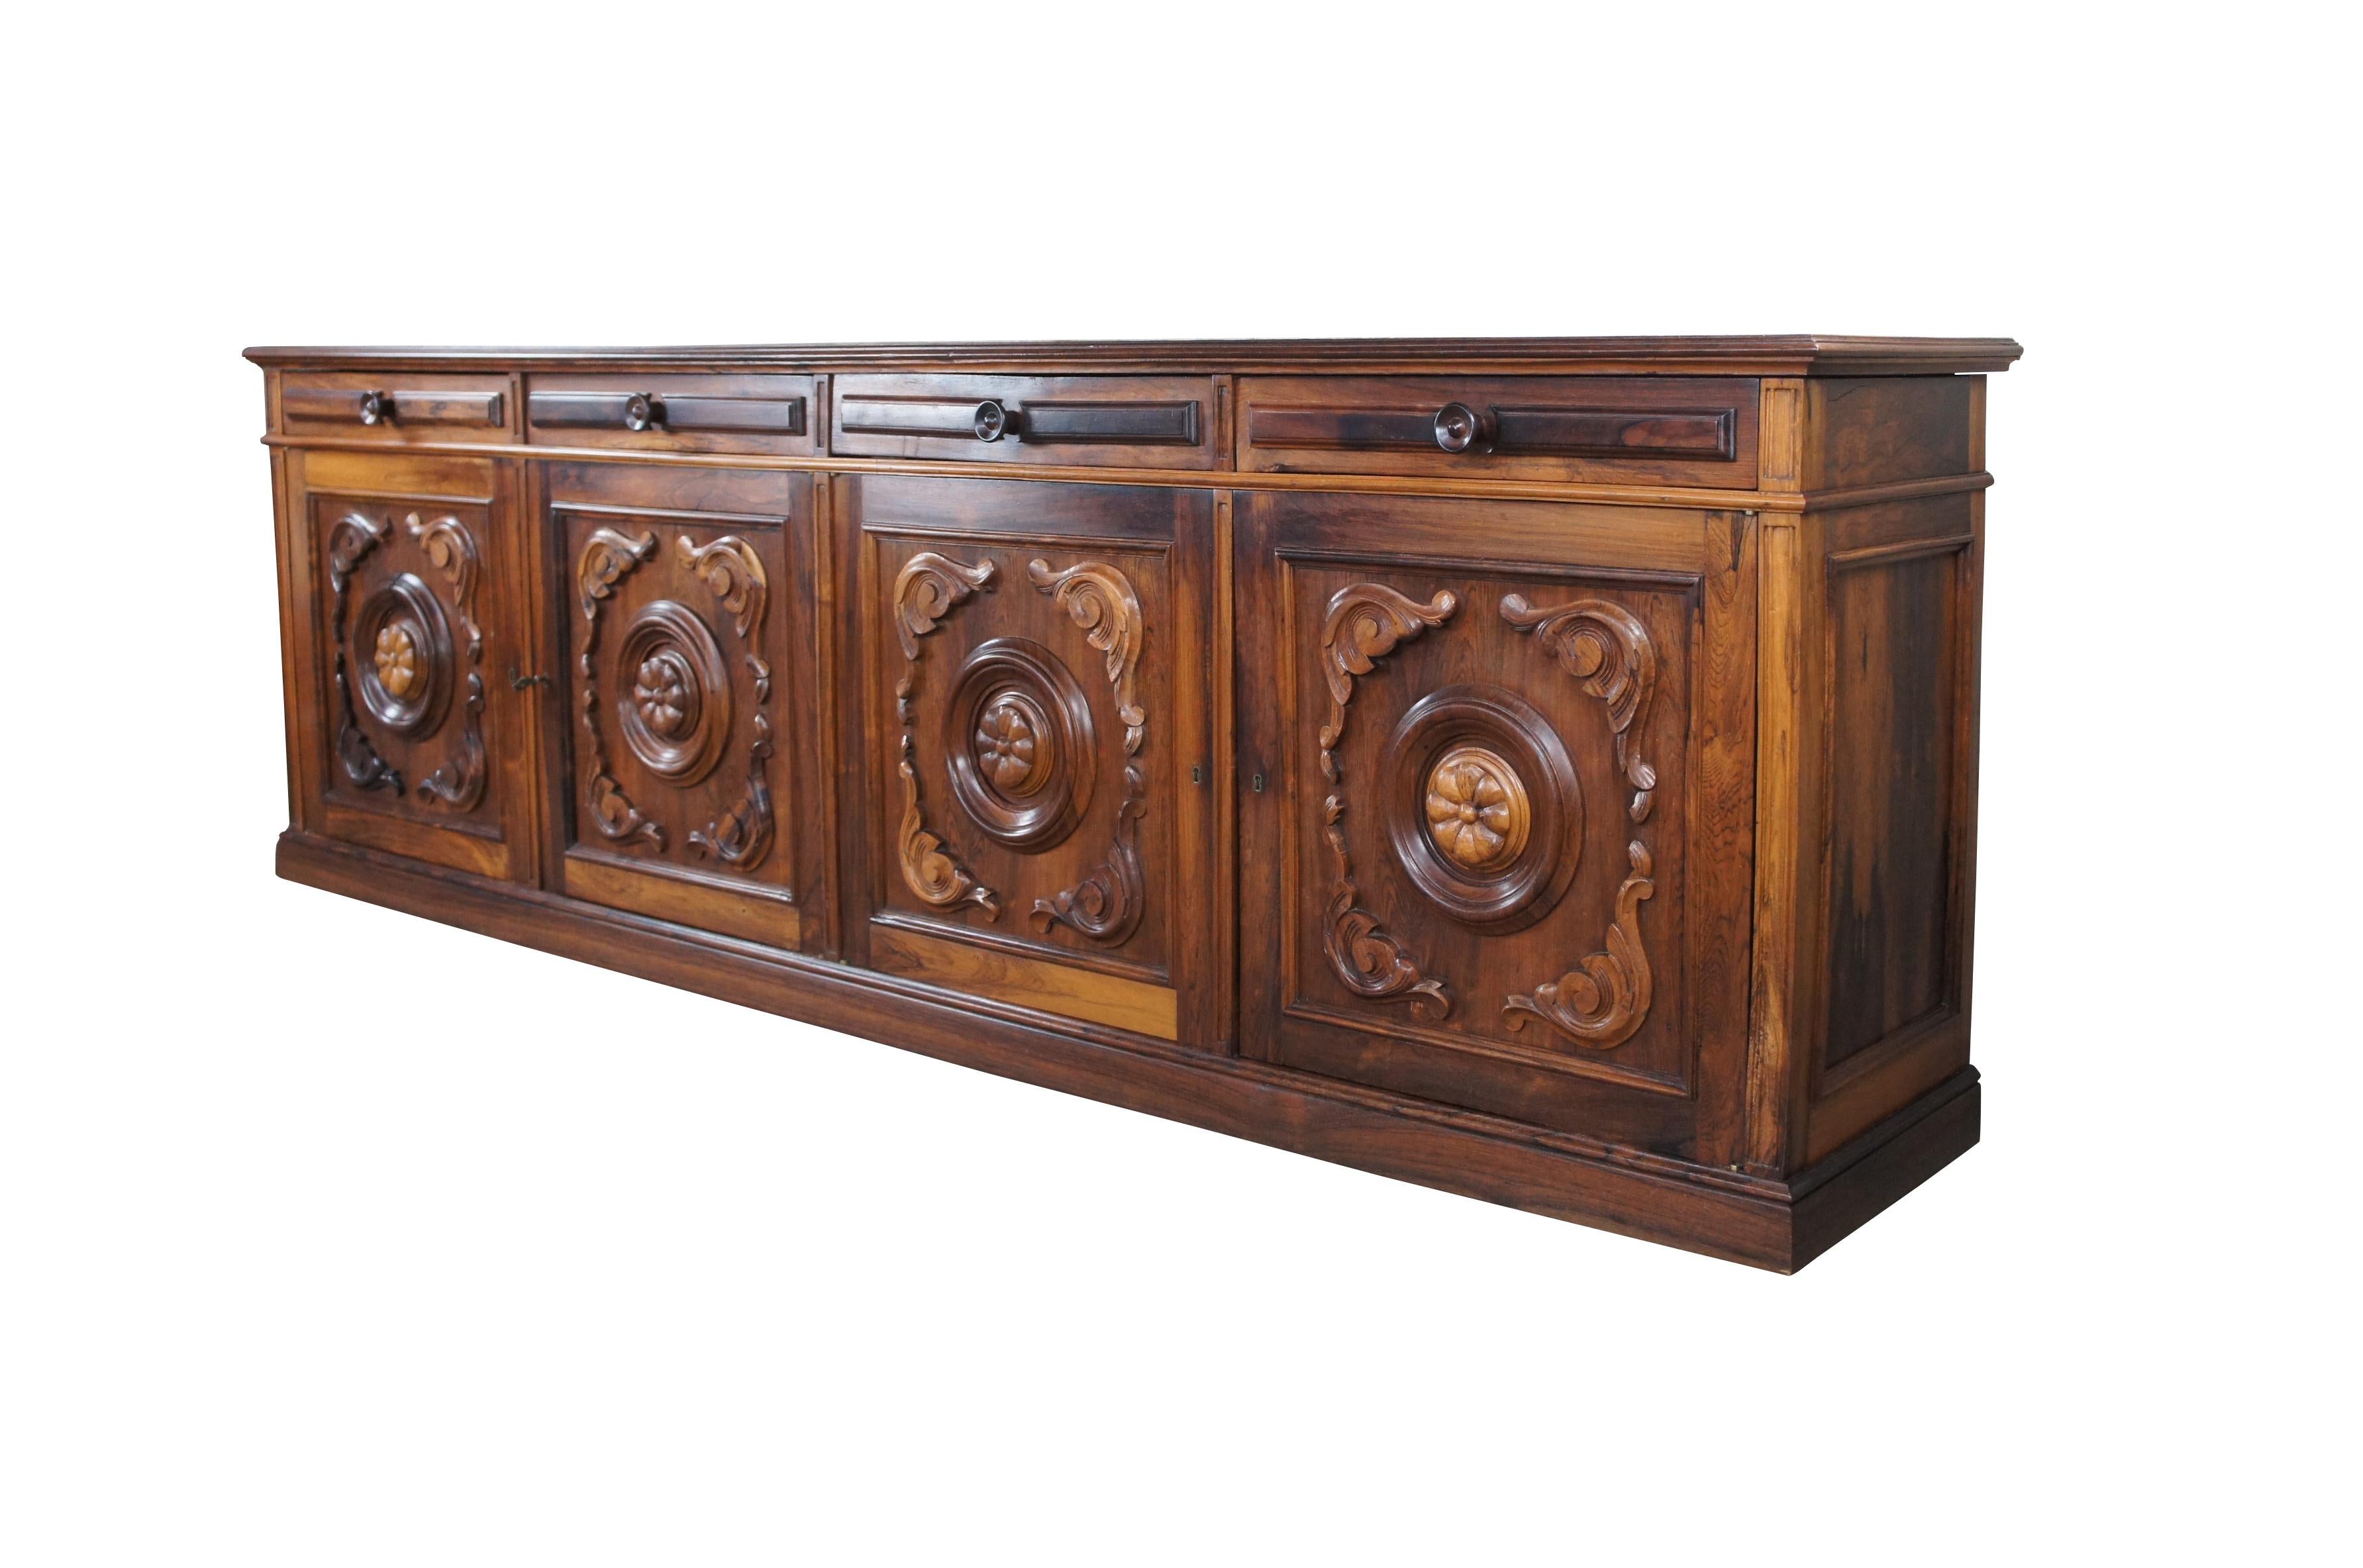 Monumental Brazilian Rosewood (Jacaranda) sideboard, circa 1960s. An impressive case at over eight and a half feet long. Features a mix of French Provincial and Brittany styling. Includes four large dovetailed drawers over two lower cabinets with